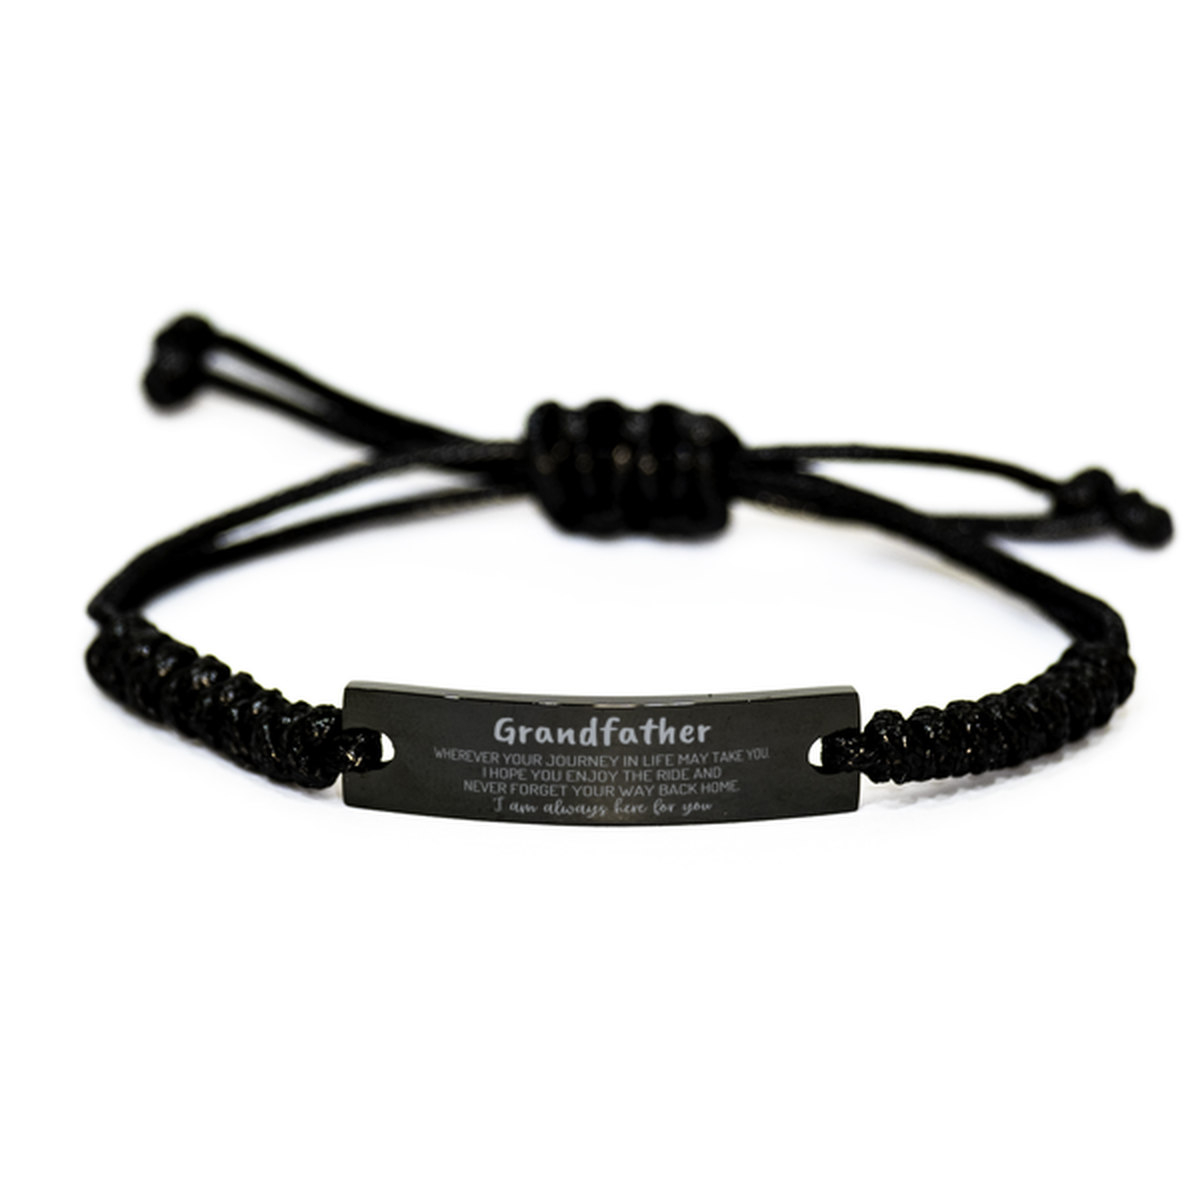 Grandfather wherever your journey in life may take you, I am always here for you Grandfather Black Rope Bracelet, Awesome Christmas Gifts For Grandfather, Grandfather Birthday Gifts for Men Women Family Loved One